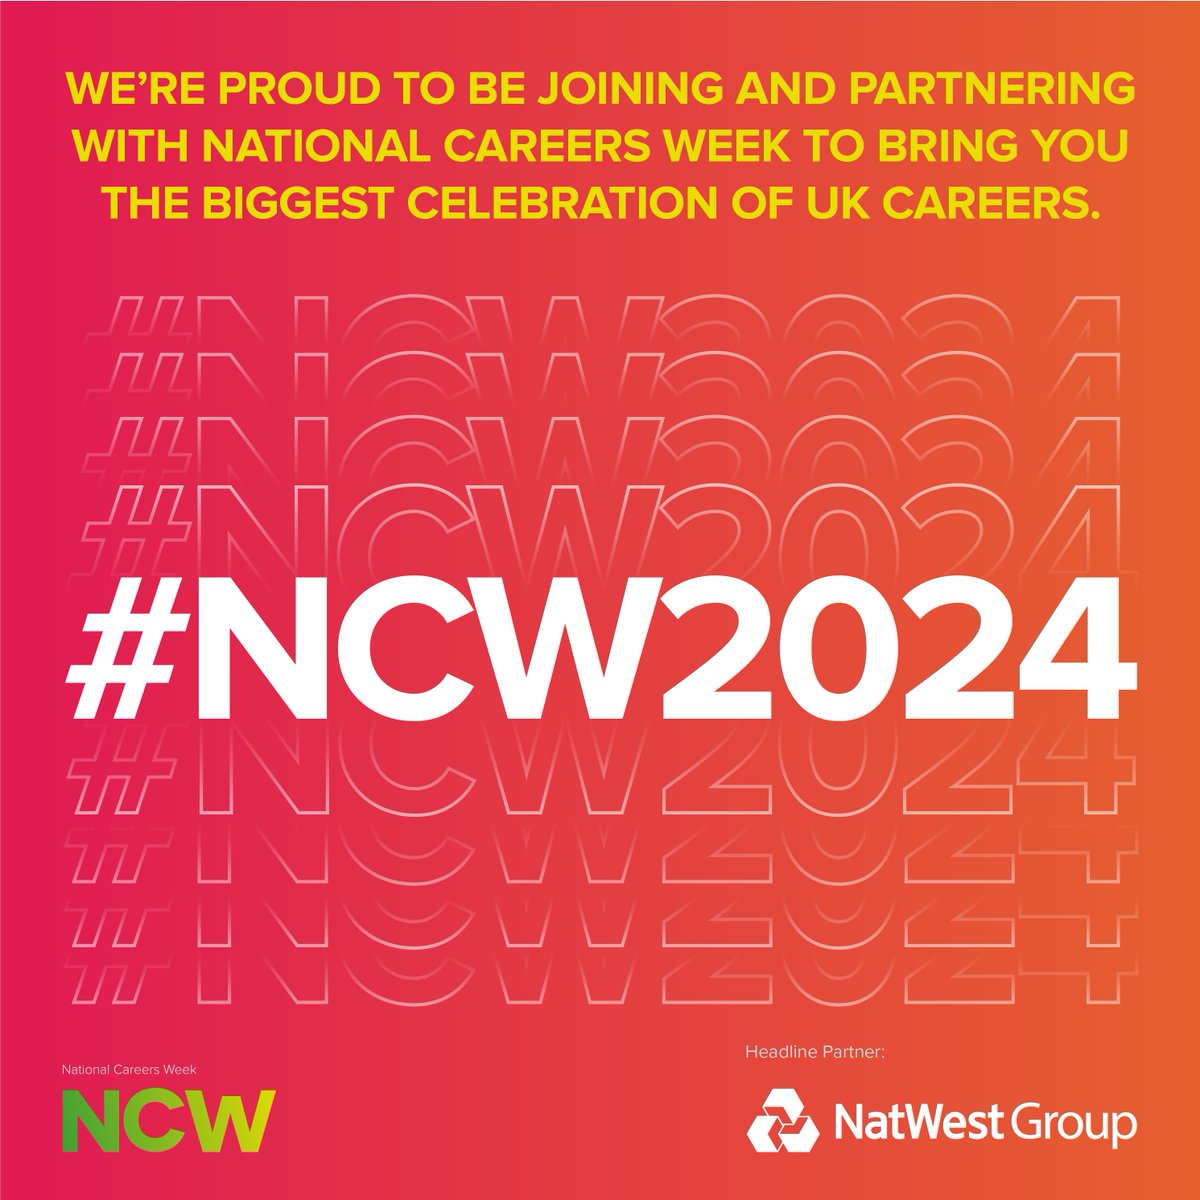 🌟Day 2 of National Careers Week! #NCW2024🌟

Today were are at @tauntonschool for the Independent School Careers Convention. We can't wait to answer questions and share information about #NHS #careers and #apprenticeships!

@CareersWeek @somNHS_LD